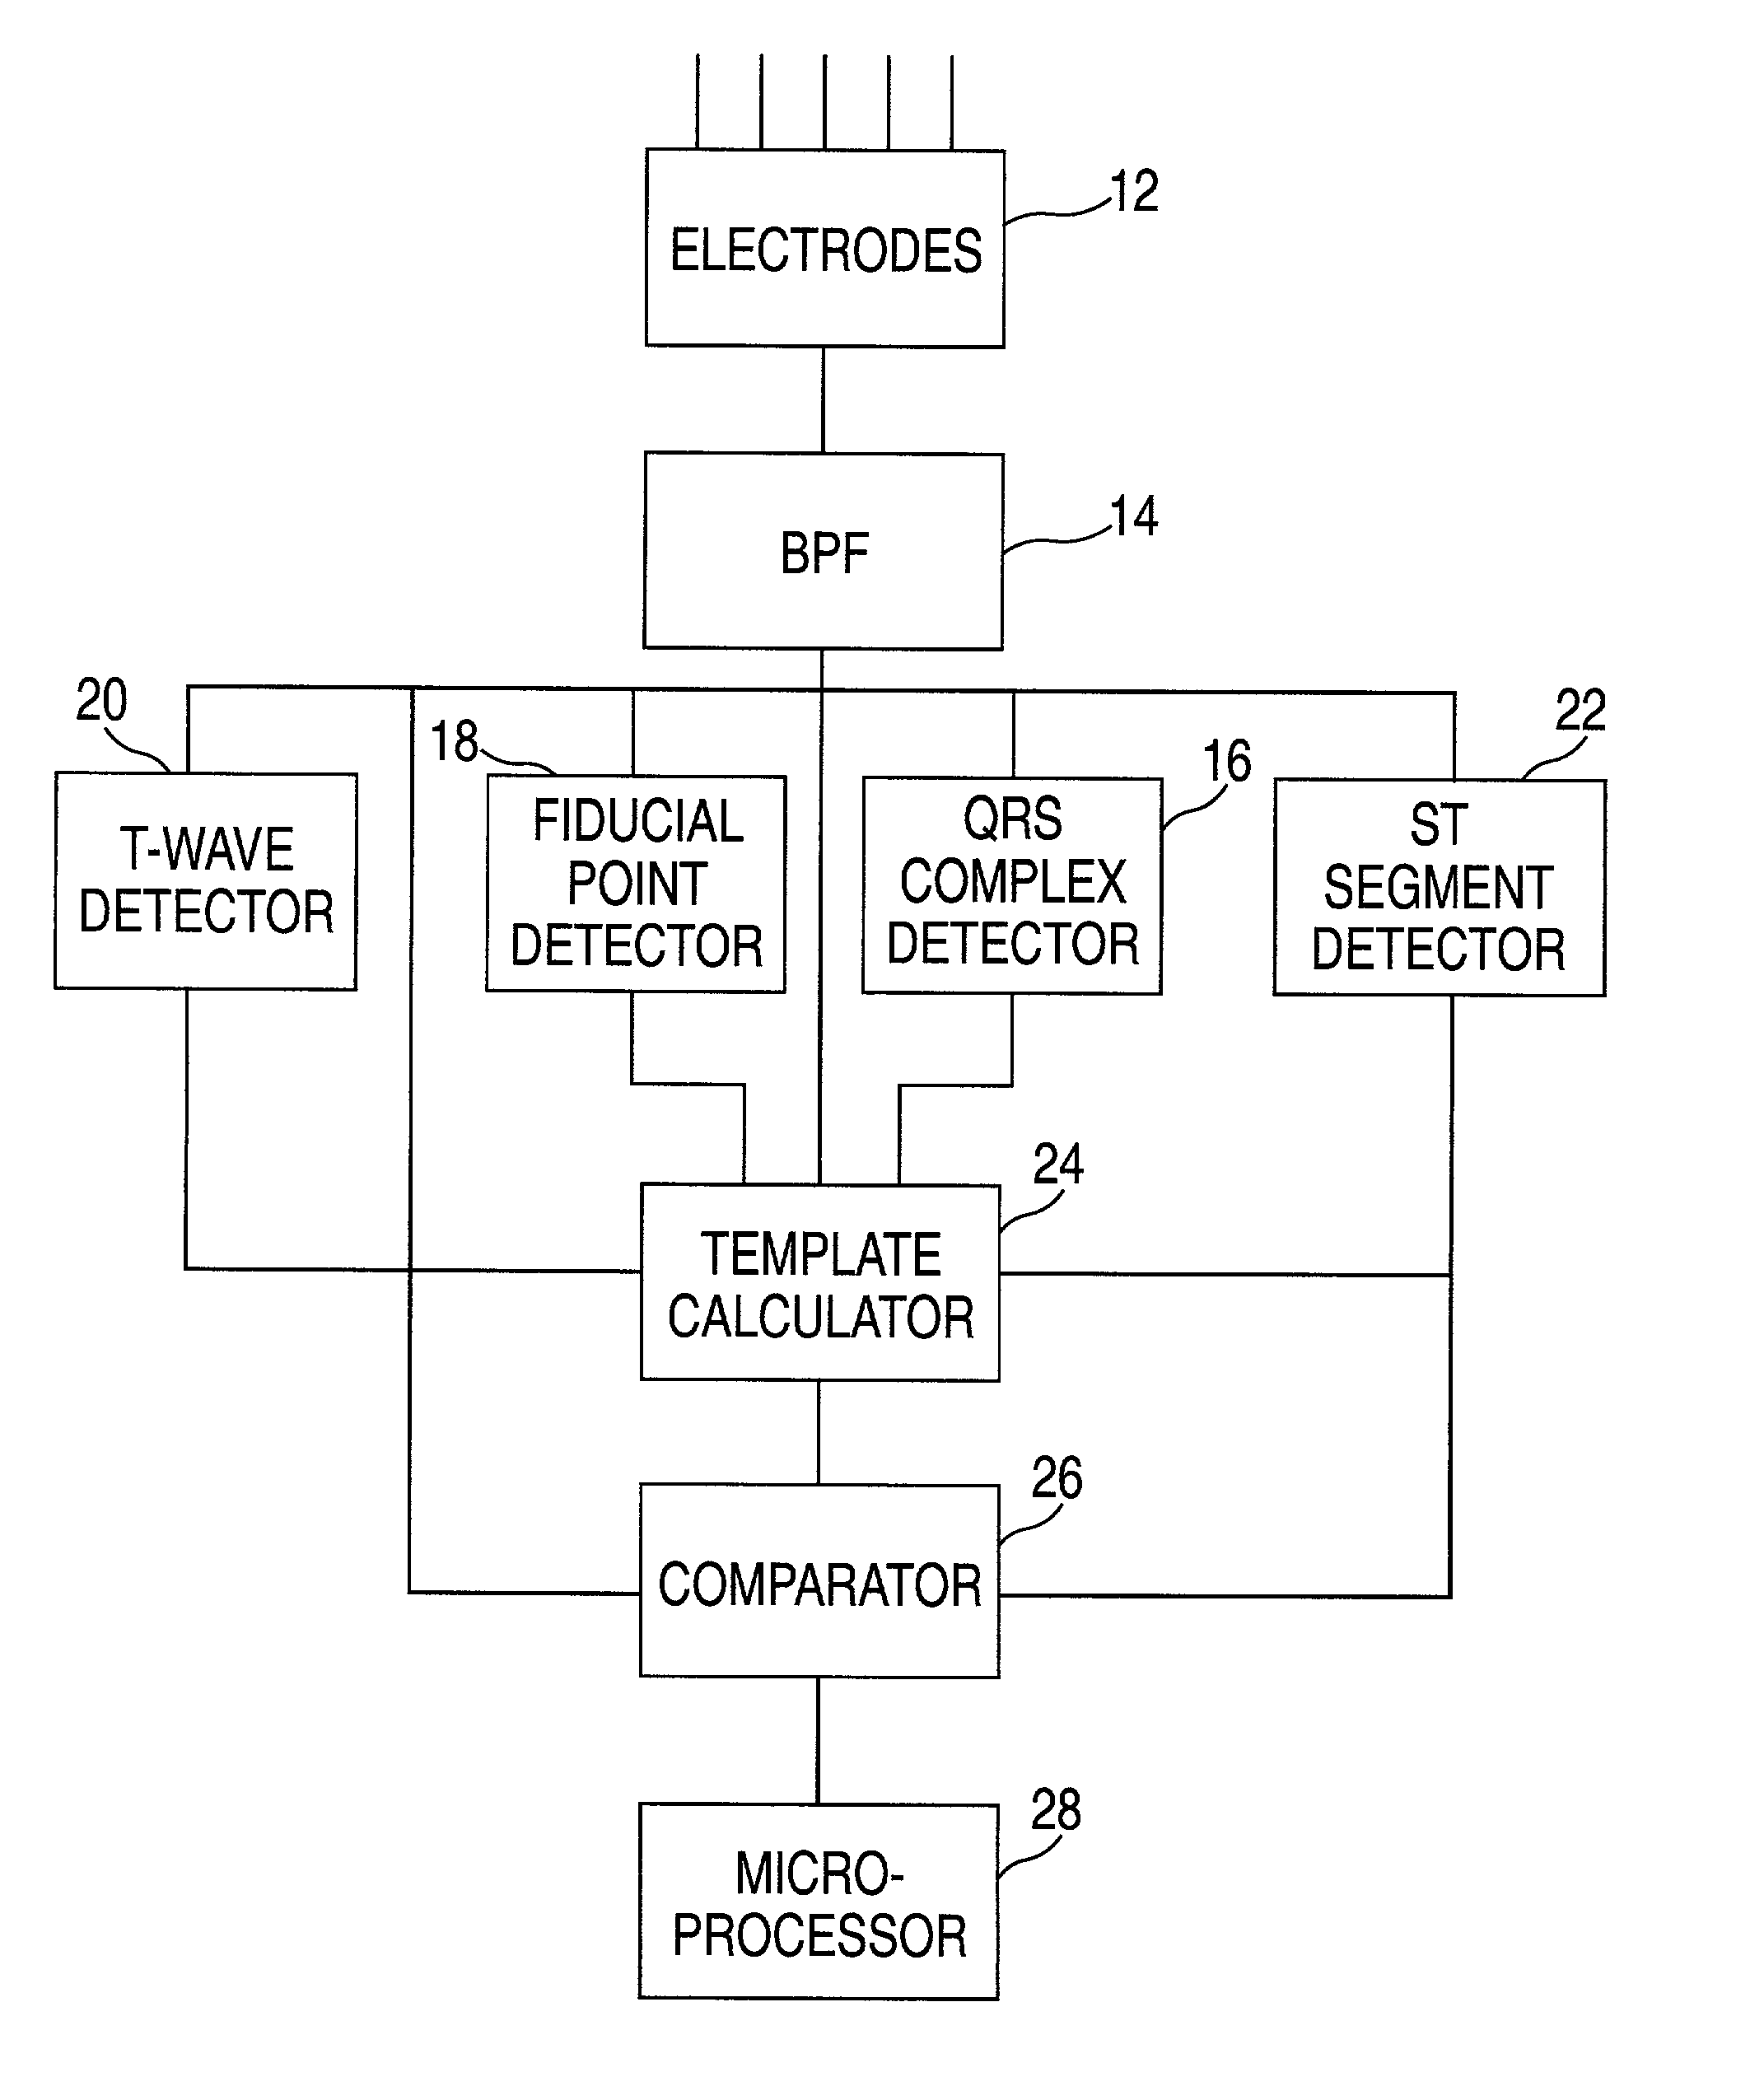 Method and apparatus for monitoring cardiac patients for T-wave alternans